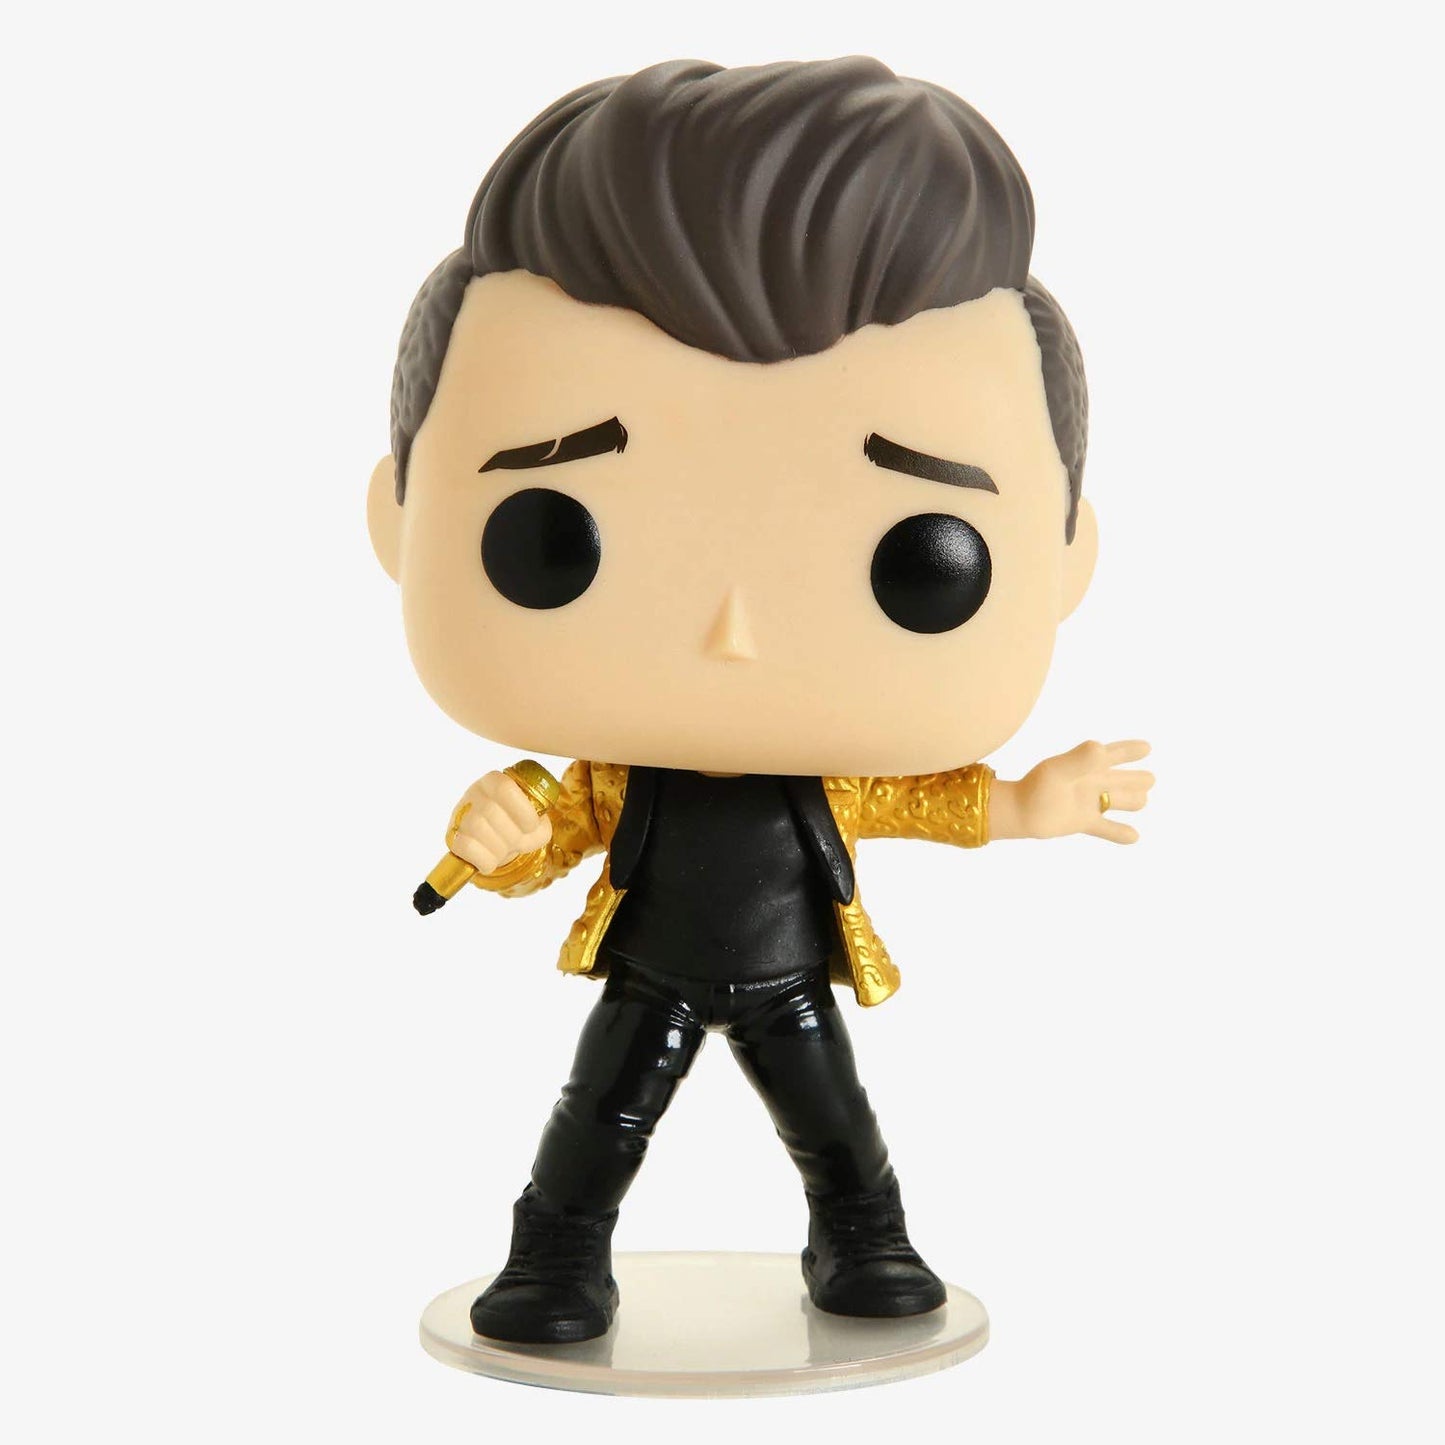 Funko POP! Rocks Panic! At The Disco Brendon Urie #133 Exclusive